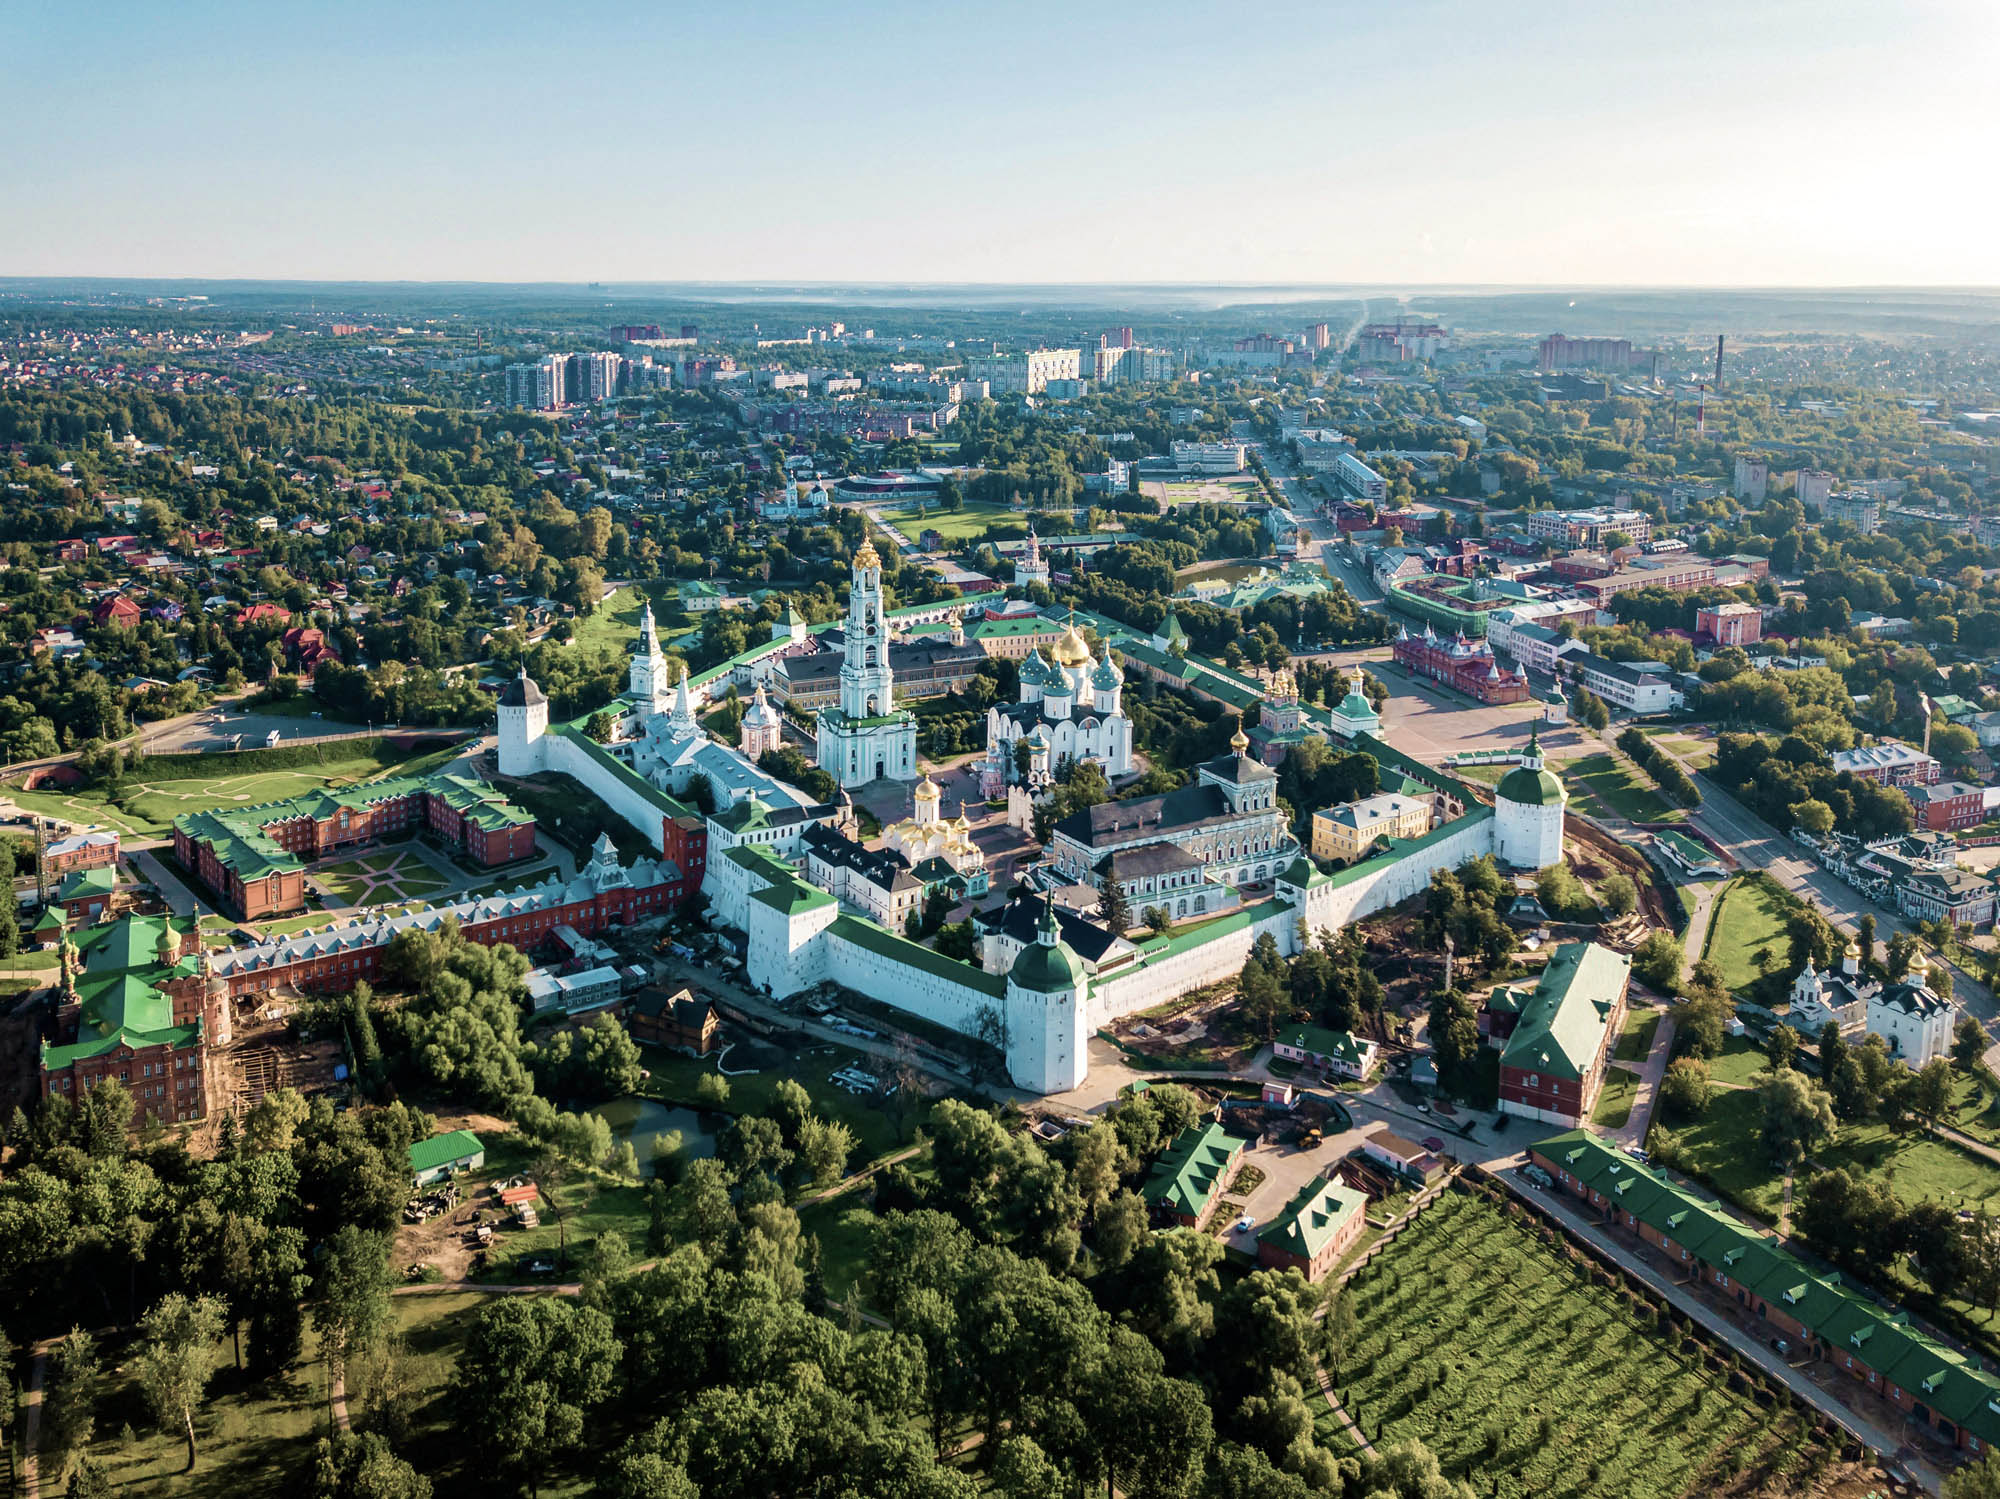 Walled monastery complex of Sergiyev Posad, Russia, from the air